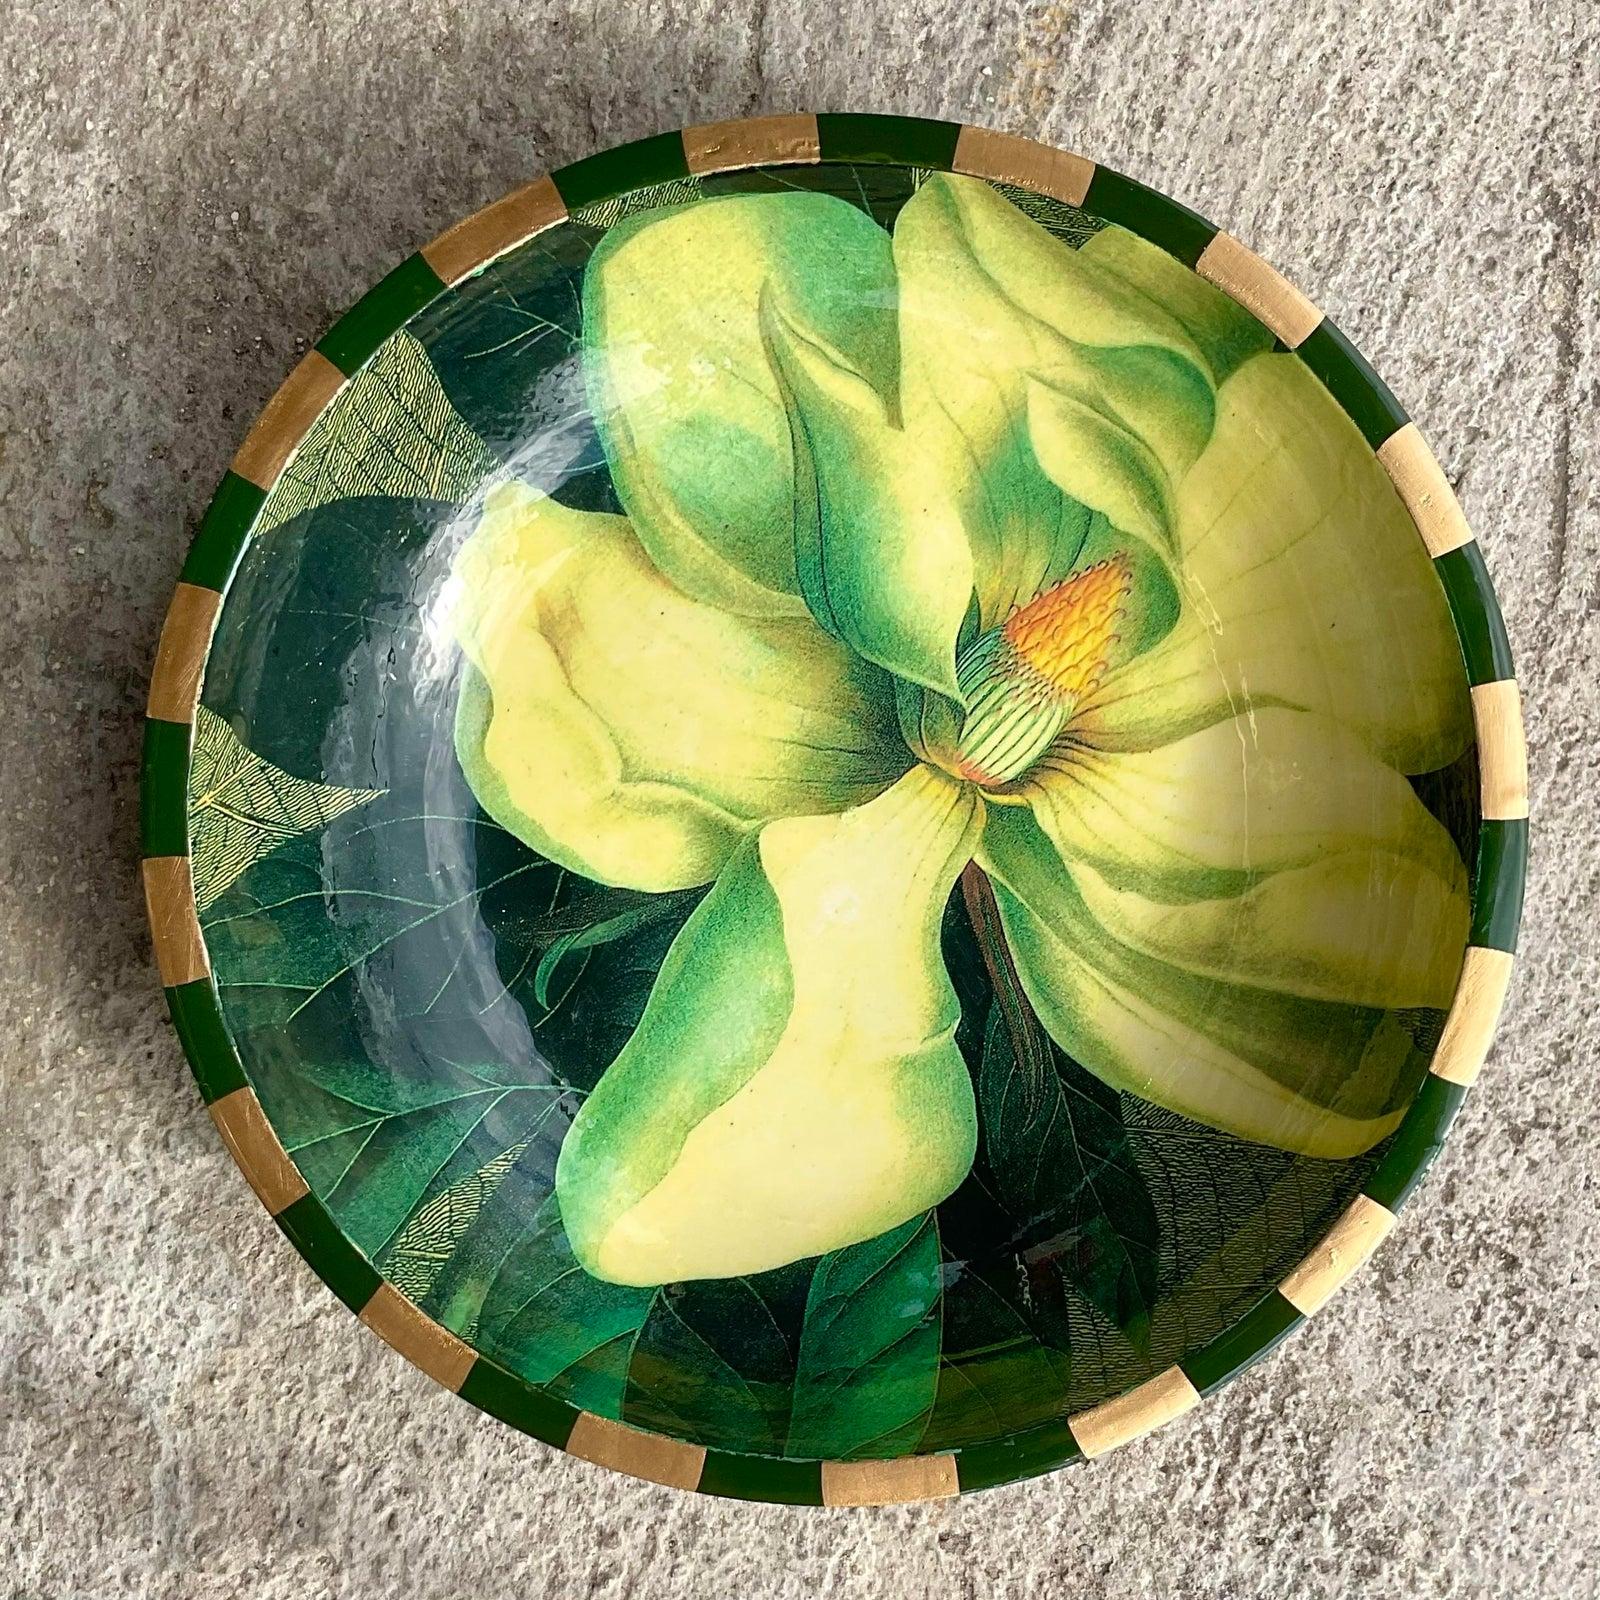 A fantastic vintage Decorative wooden bowl. A gorgeous magnolia image with a lacquered finish. Acquired from a Palm Beach estate.